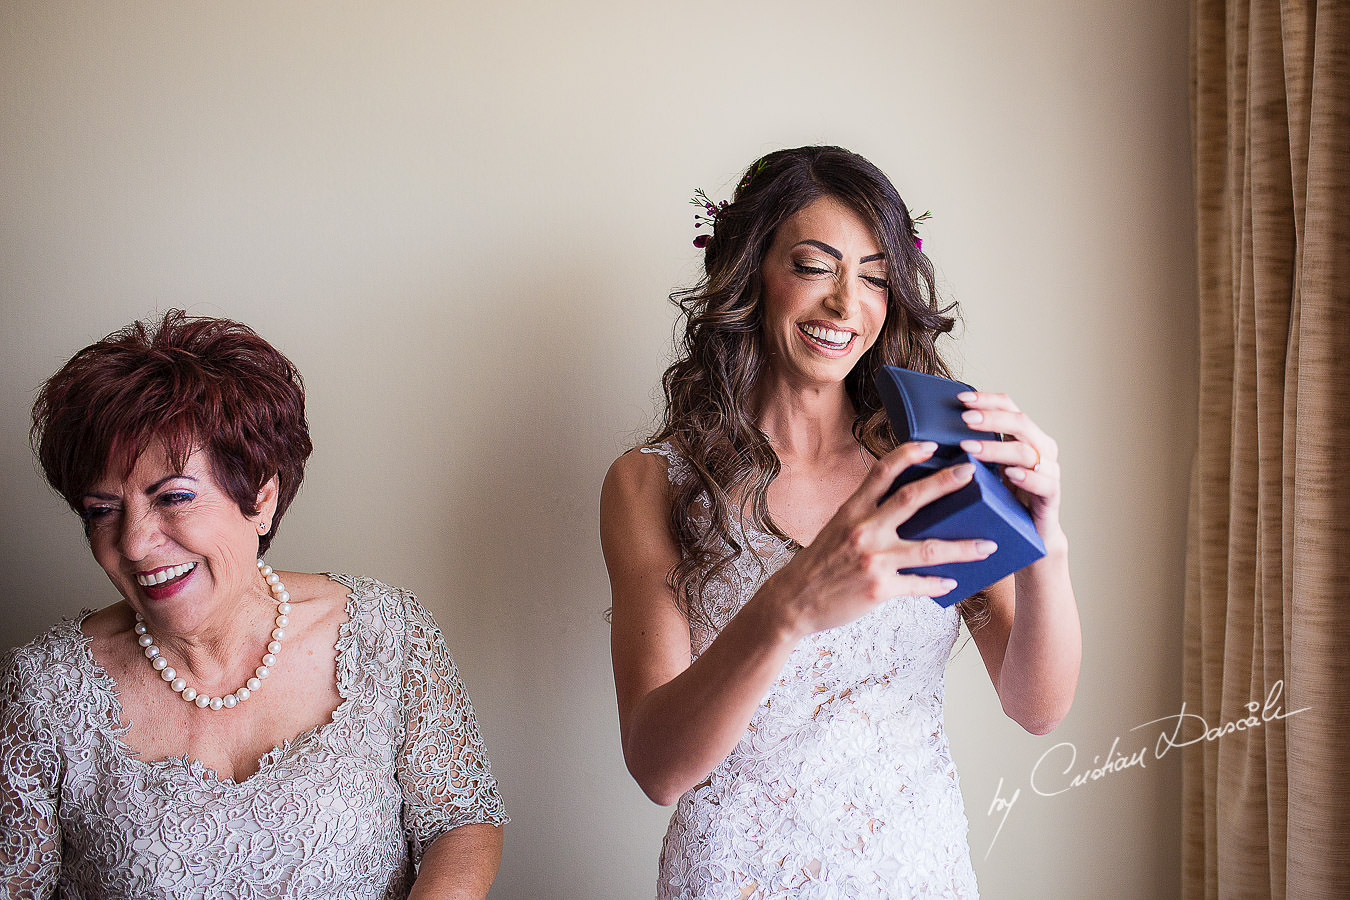 Christiana, the bride, receiving her wedding present from her future husband to be, moments captured at a wedding in Cyprus by Cristian Dascalu Photographer.